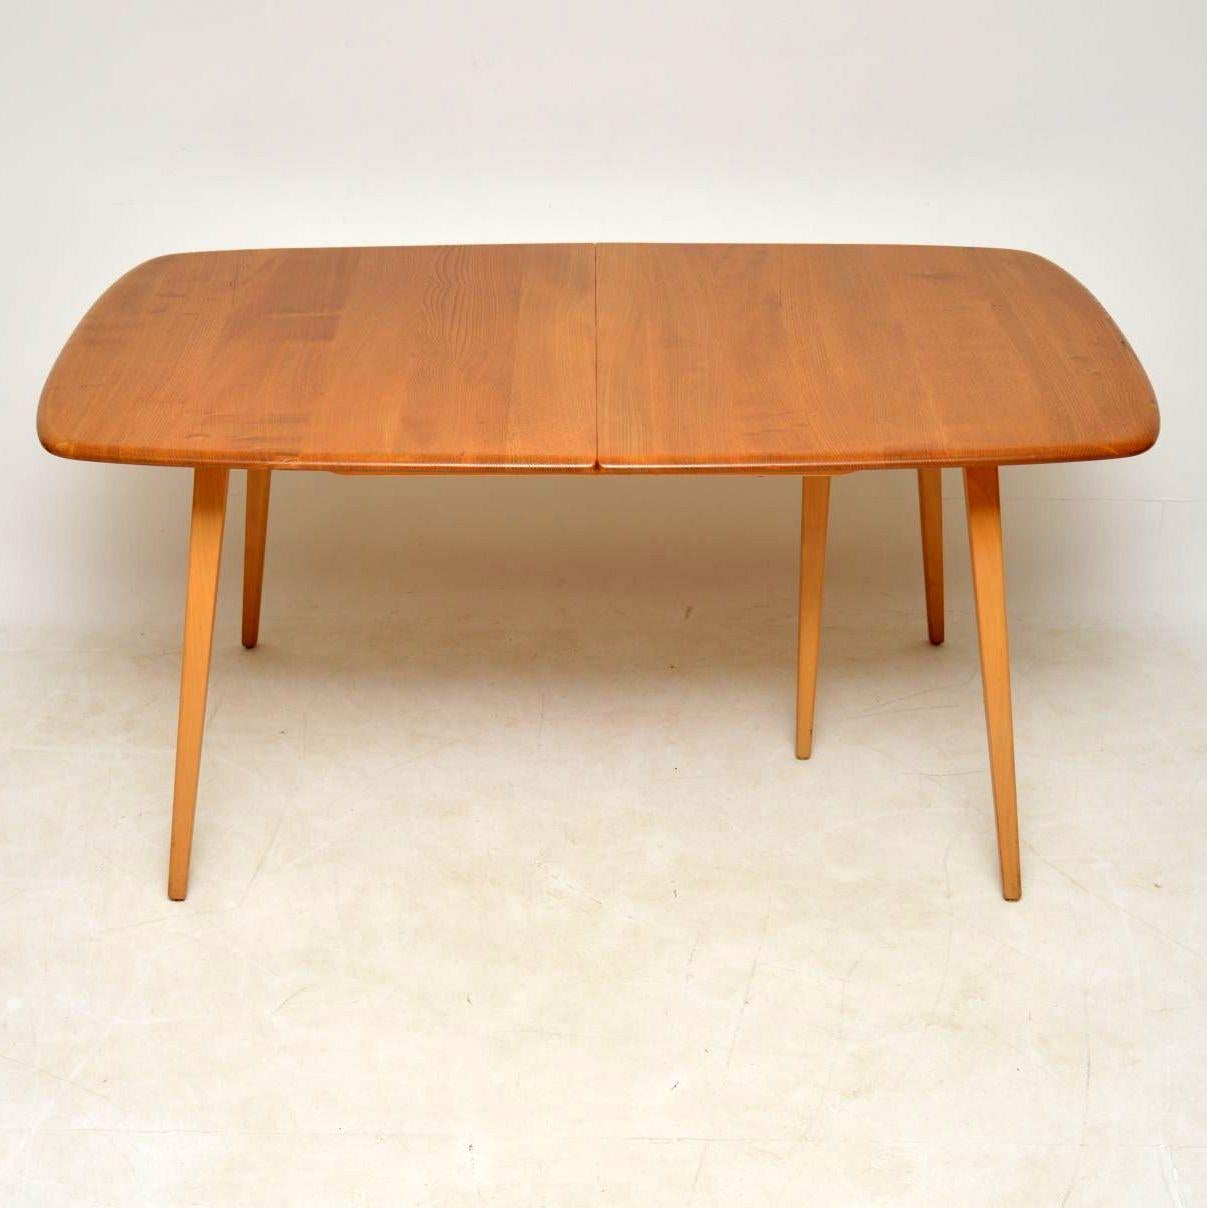 A stunning and top quality dining suite by Ercol, this dates from circa 1960s-1970s. It’s a beautiful blonde color, all is in superb condition with only some extremely minor wear here and there. The elm grain patterns are stunning throughout, all